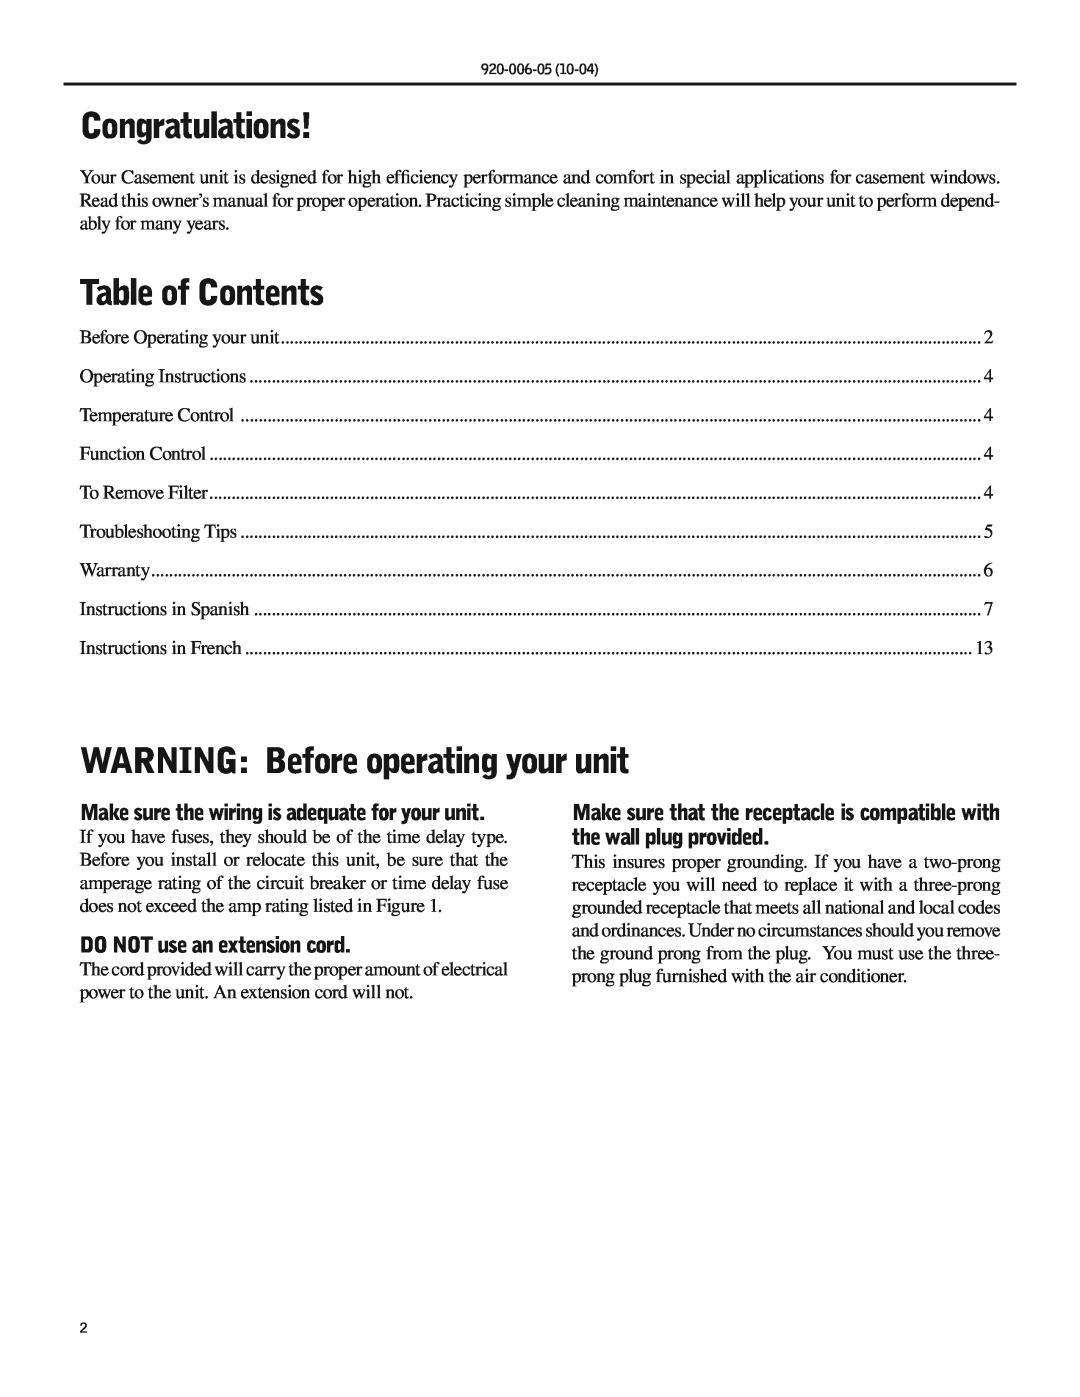 Friedrich SC06 manual Congratulations, Table of Contents, WARNING Before operating your unit, DO NOT use an extension cord 